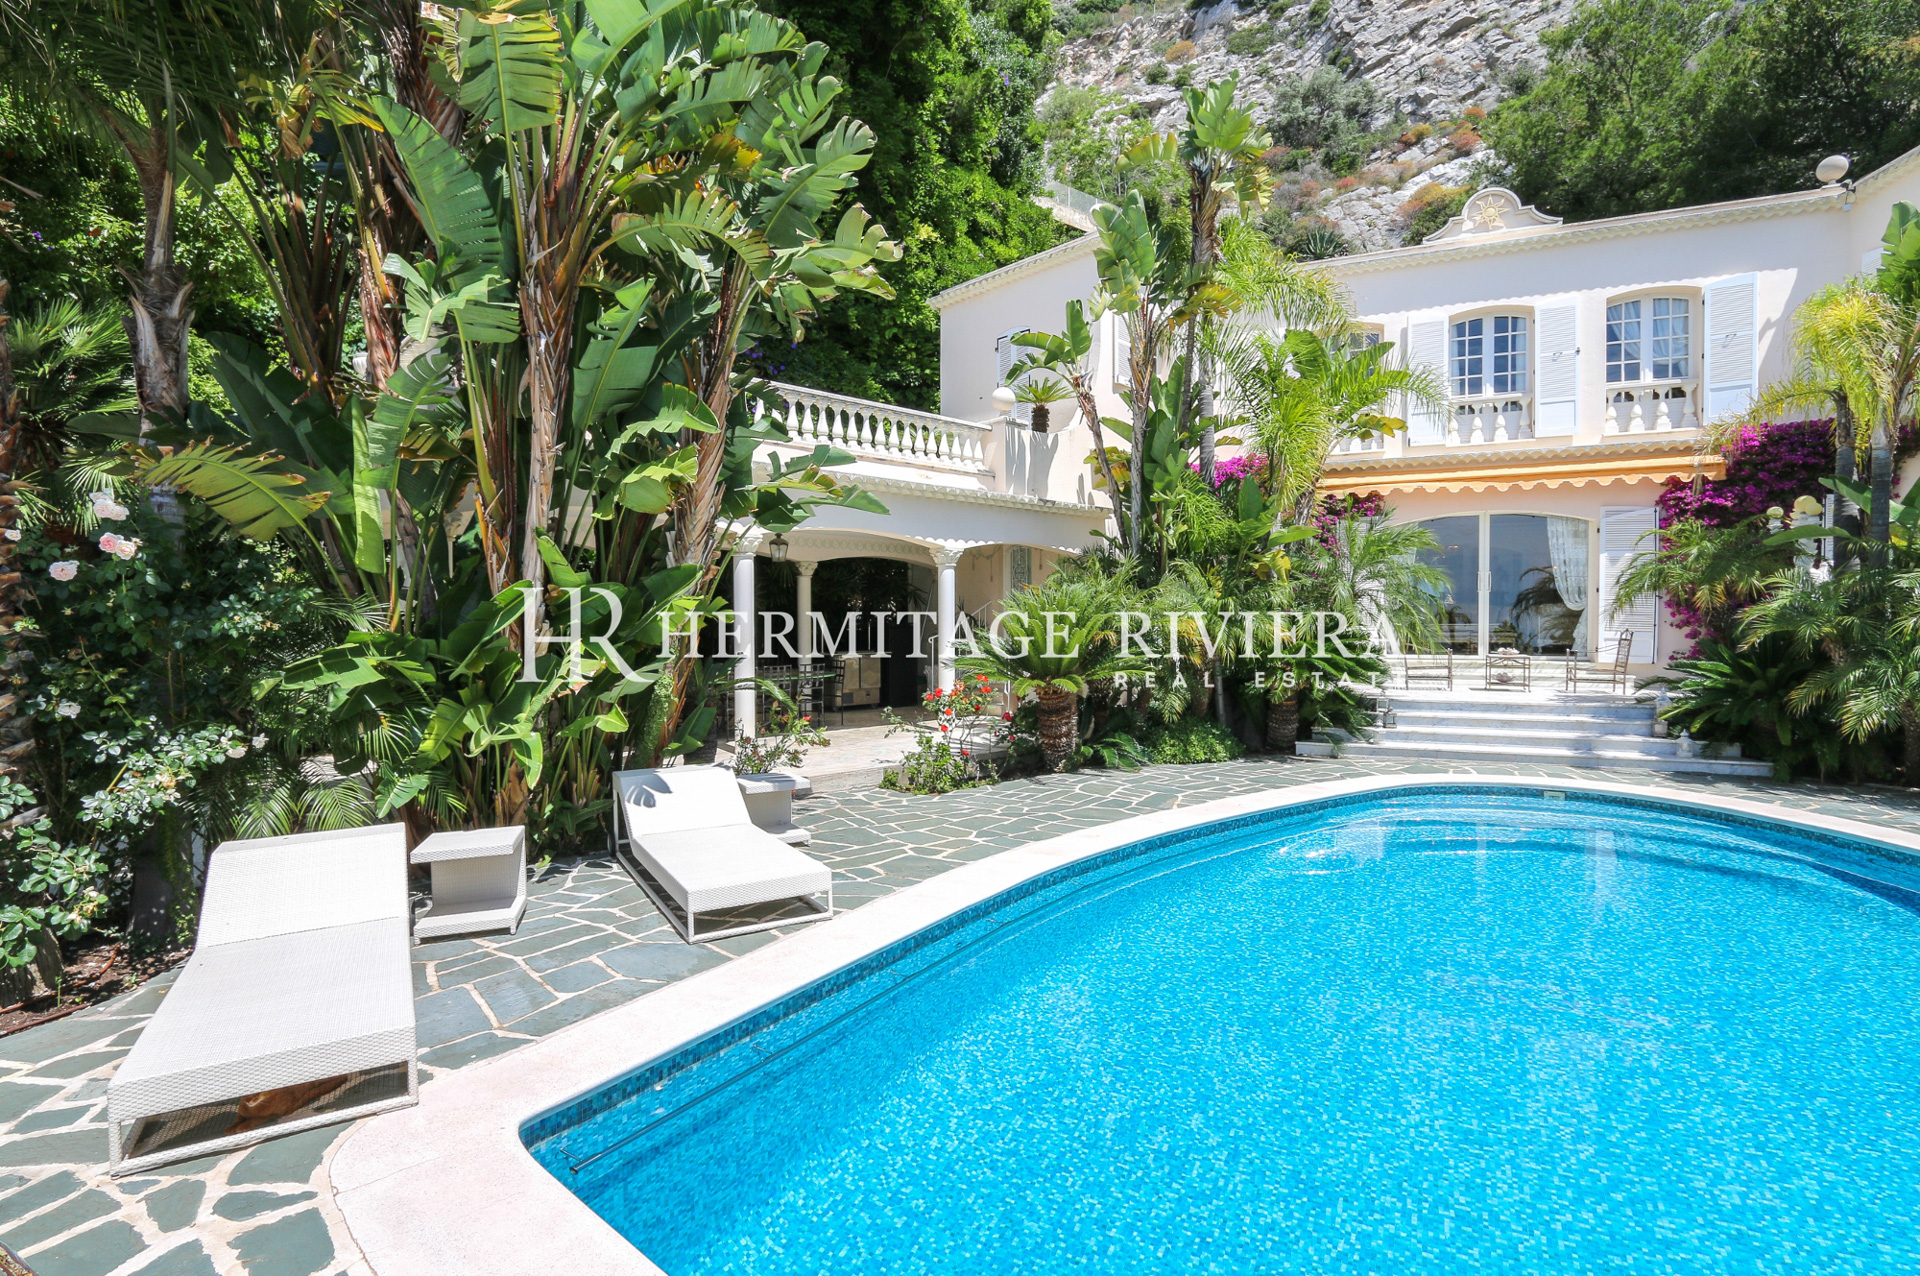 Property close Monaco with panoramic view (image 4)